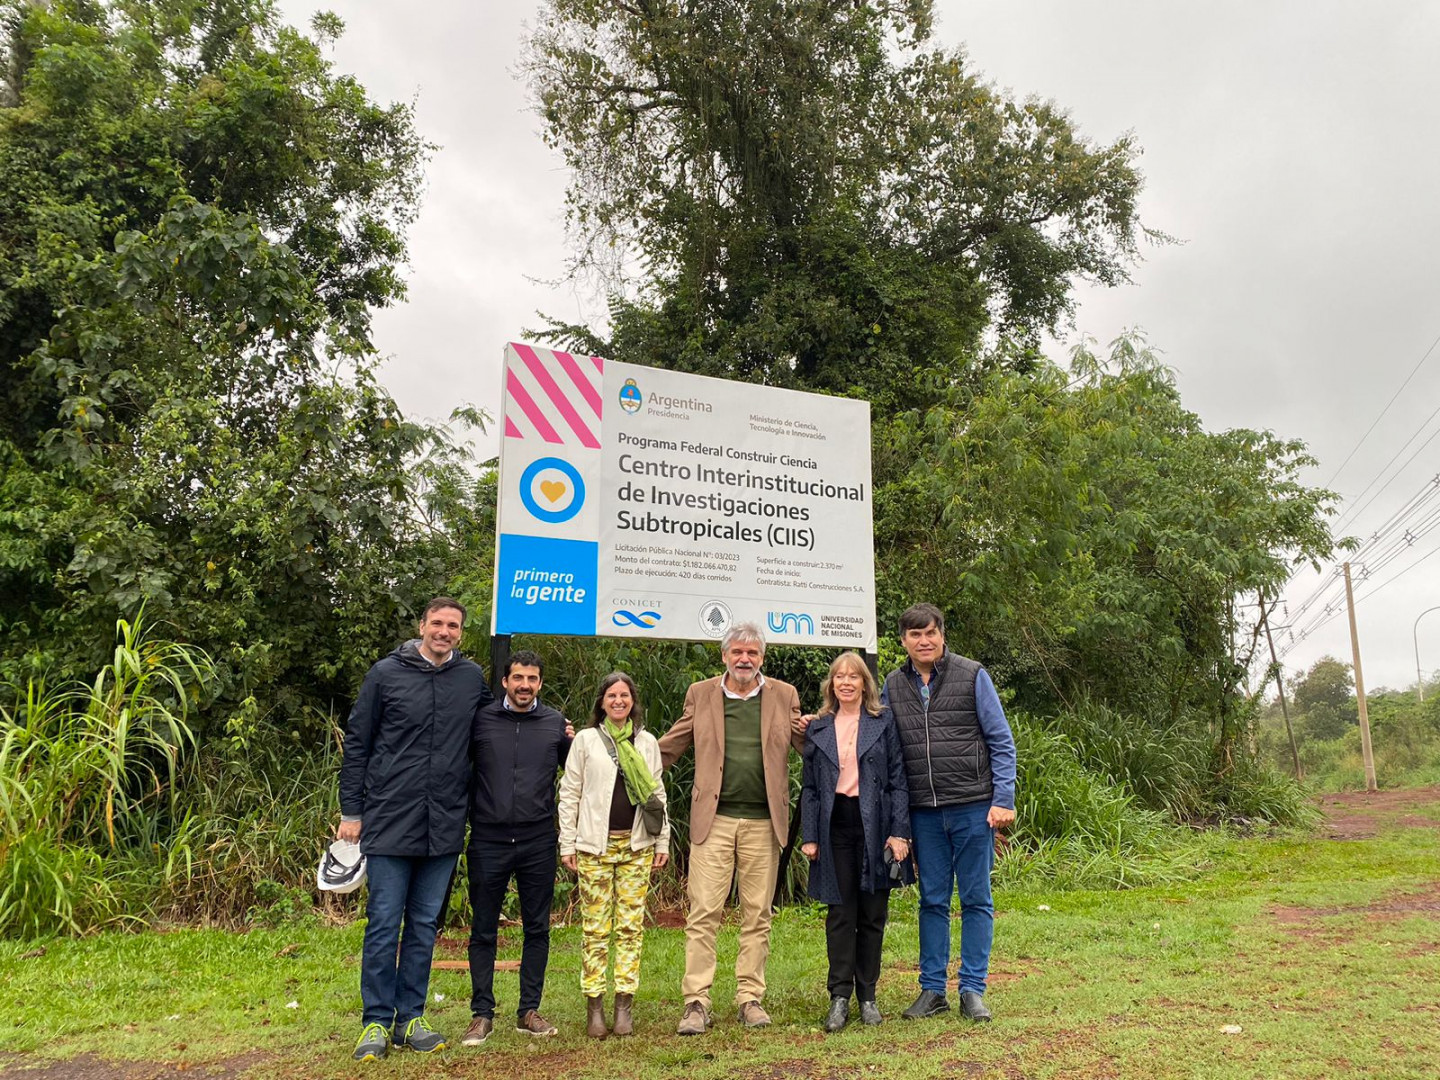 Vilmos visited the construction of the new center dedicated to biodiversity conservation in Misiones